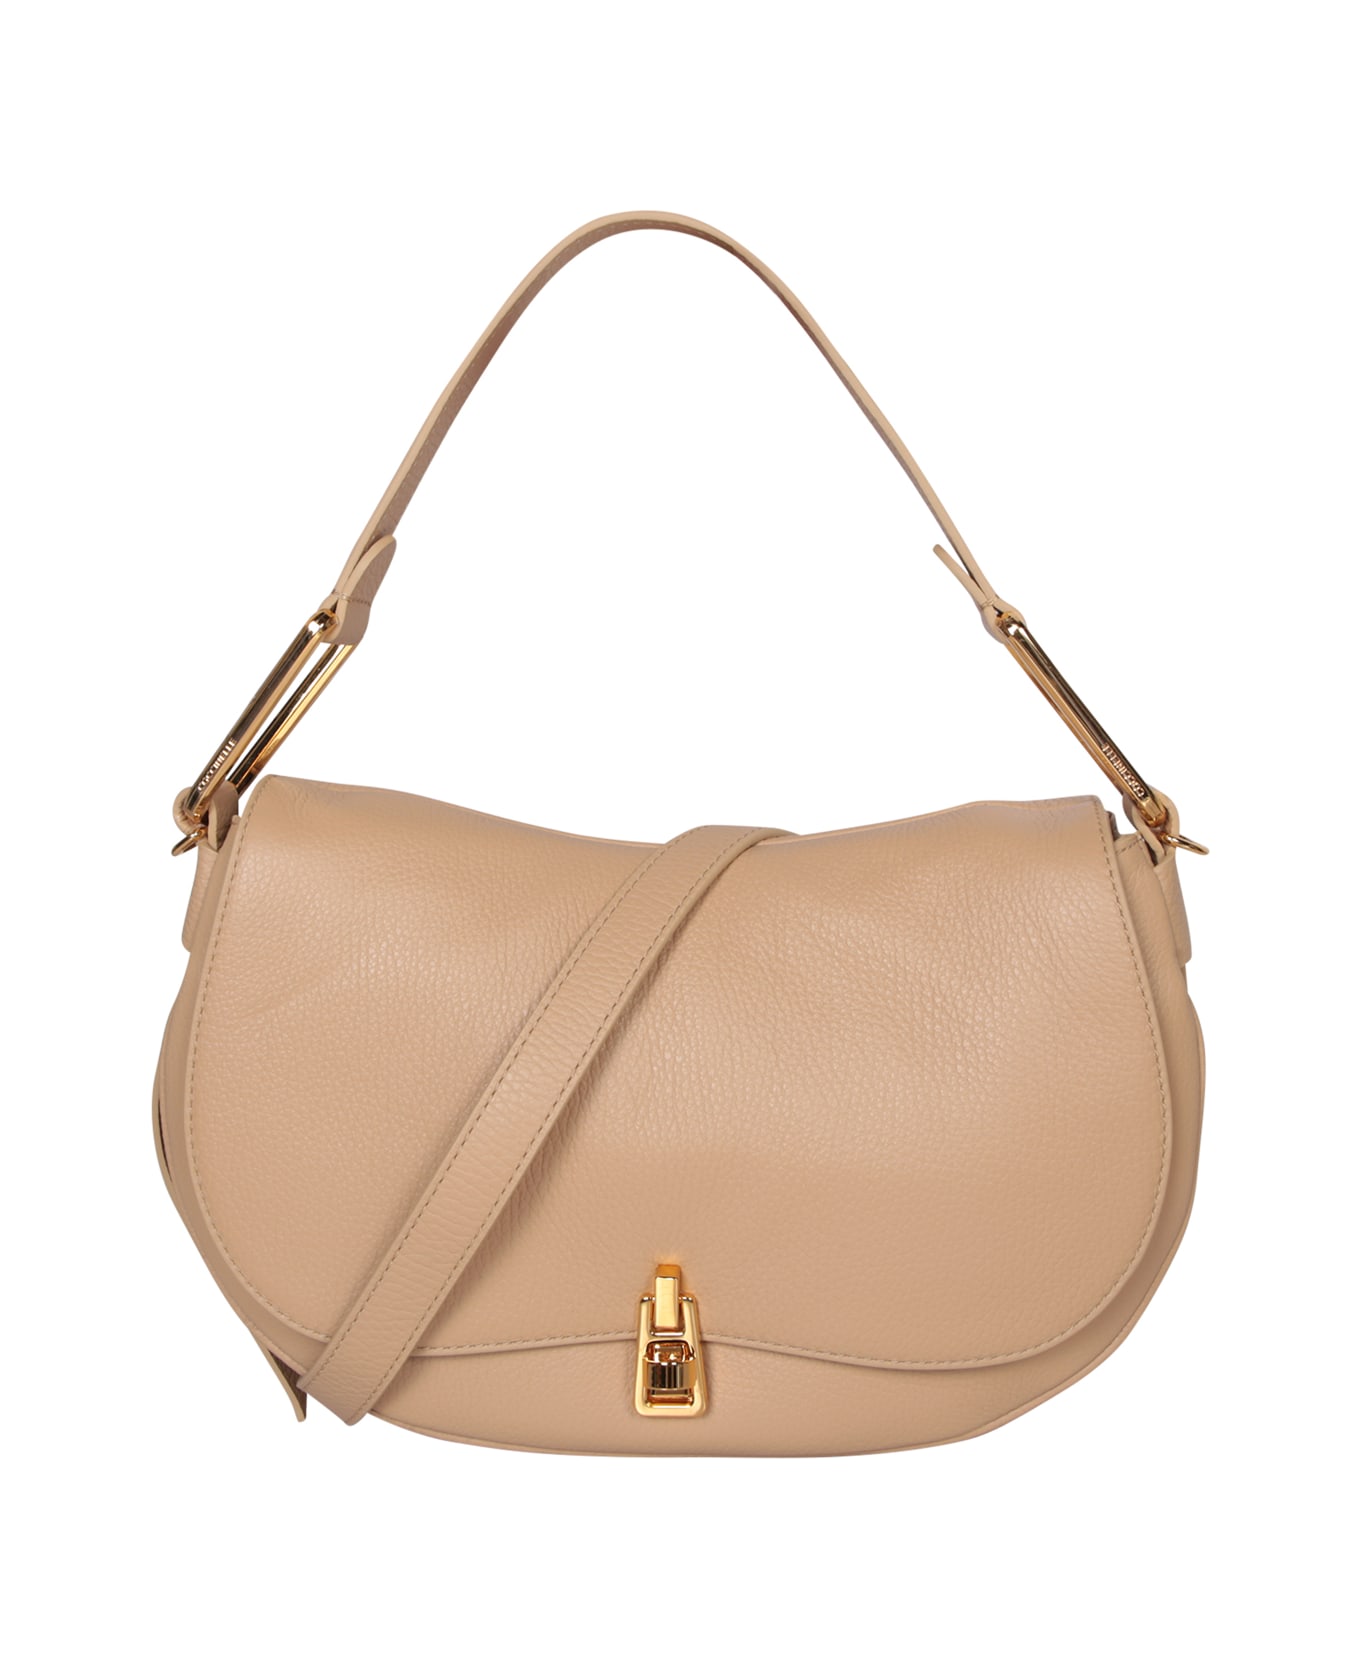 Coccinelle Magie Small Beige Bag - Beige トートバッグ